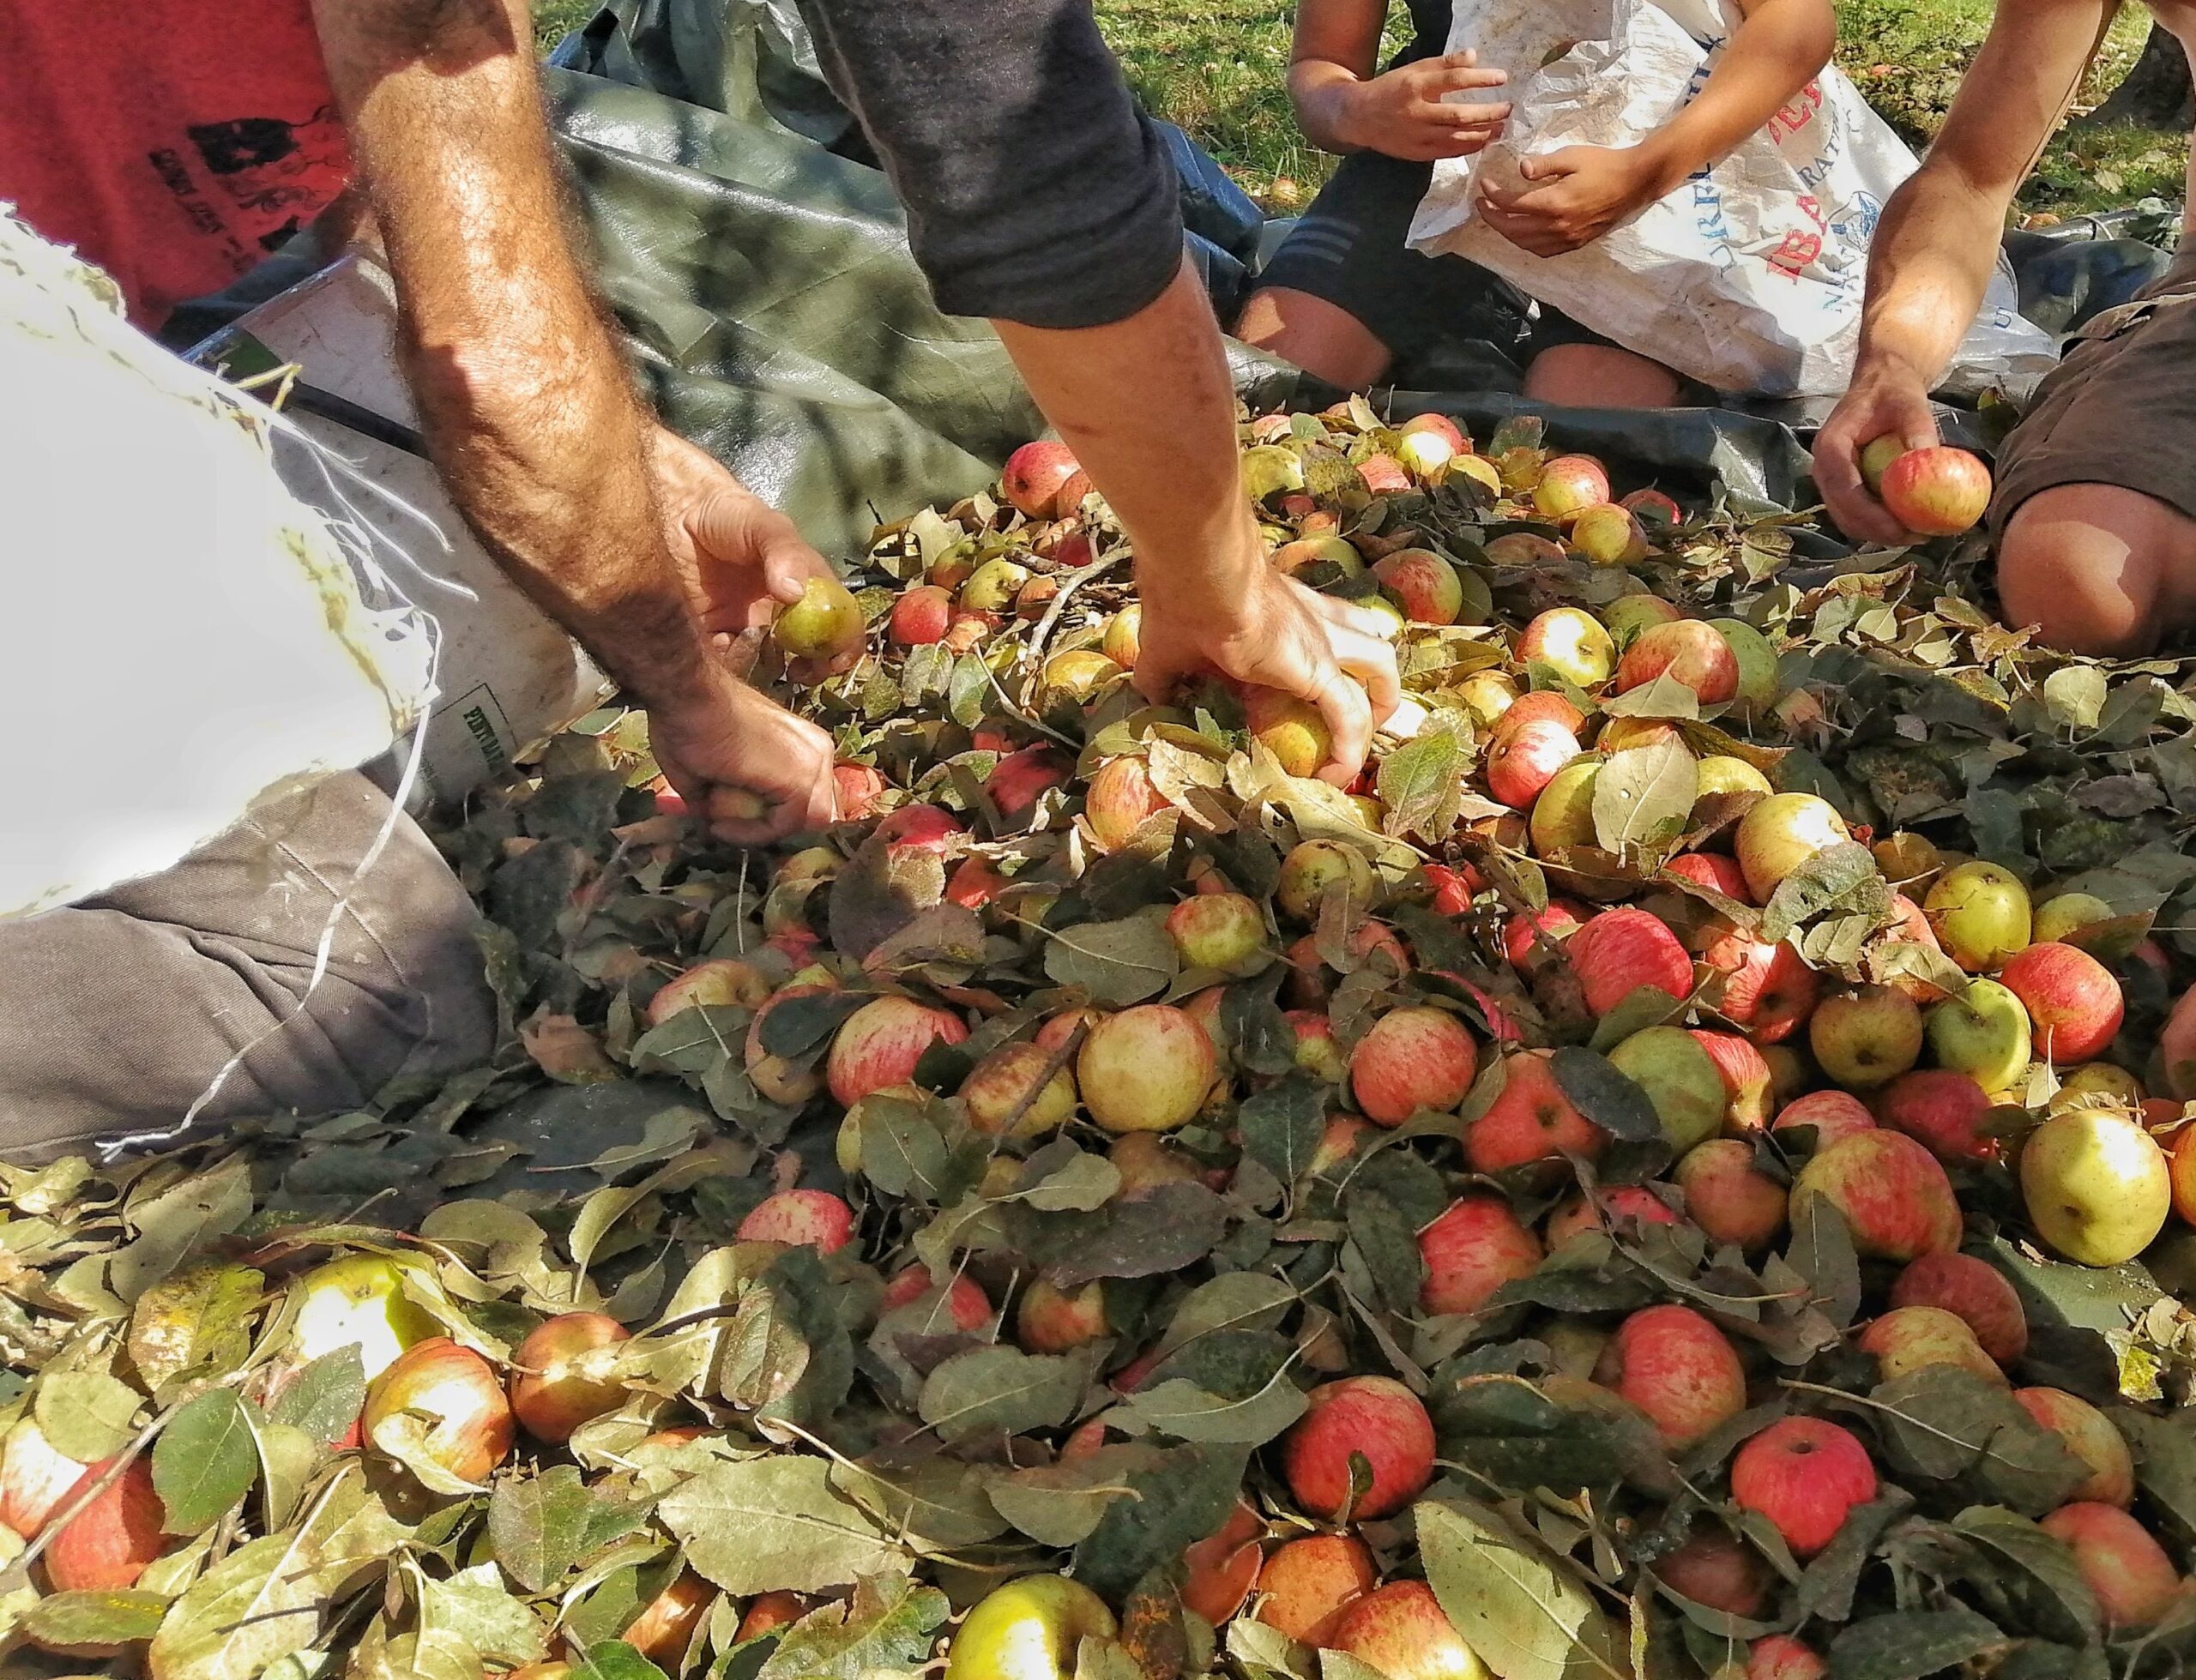 Image shows a pile of rosy apples and leaves spread out on the ground. The arms of several people can be seen sorting through the apples.